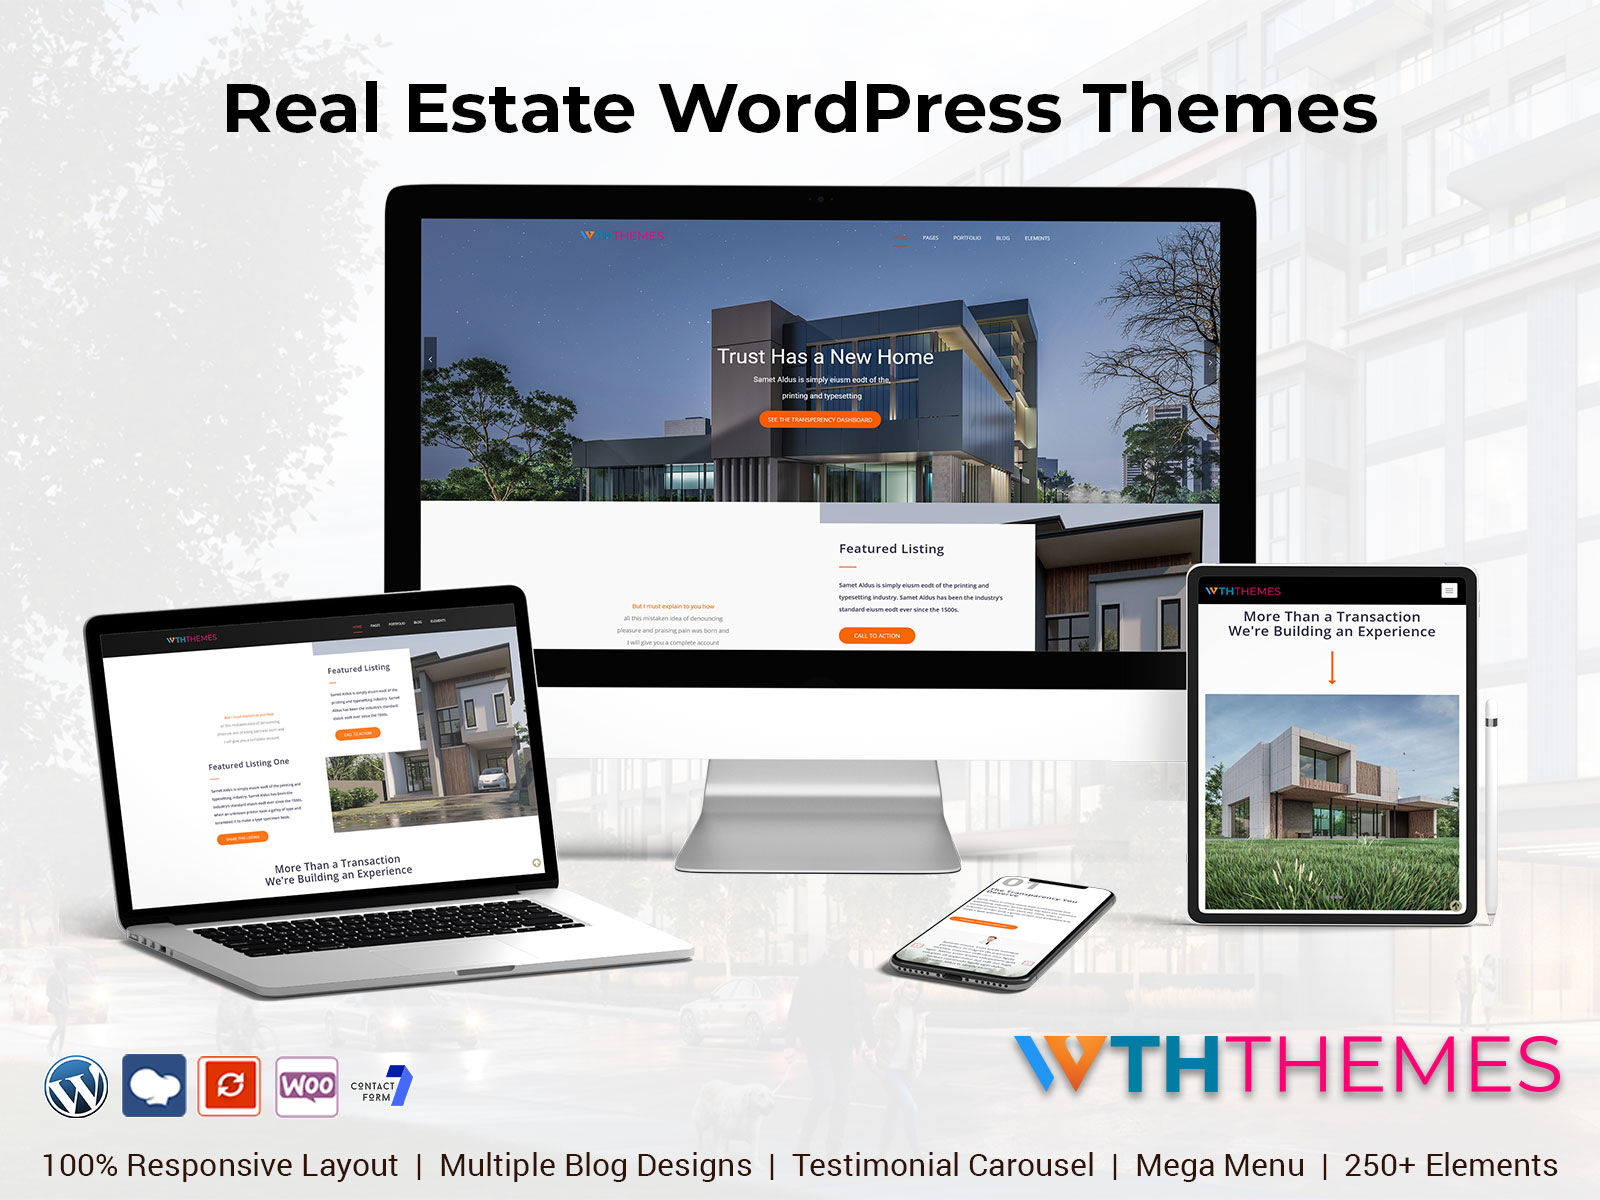 Enhance Your Property Business With Real Estate WordPress Theme